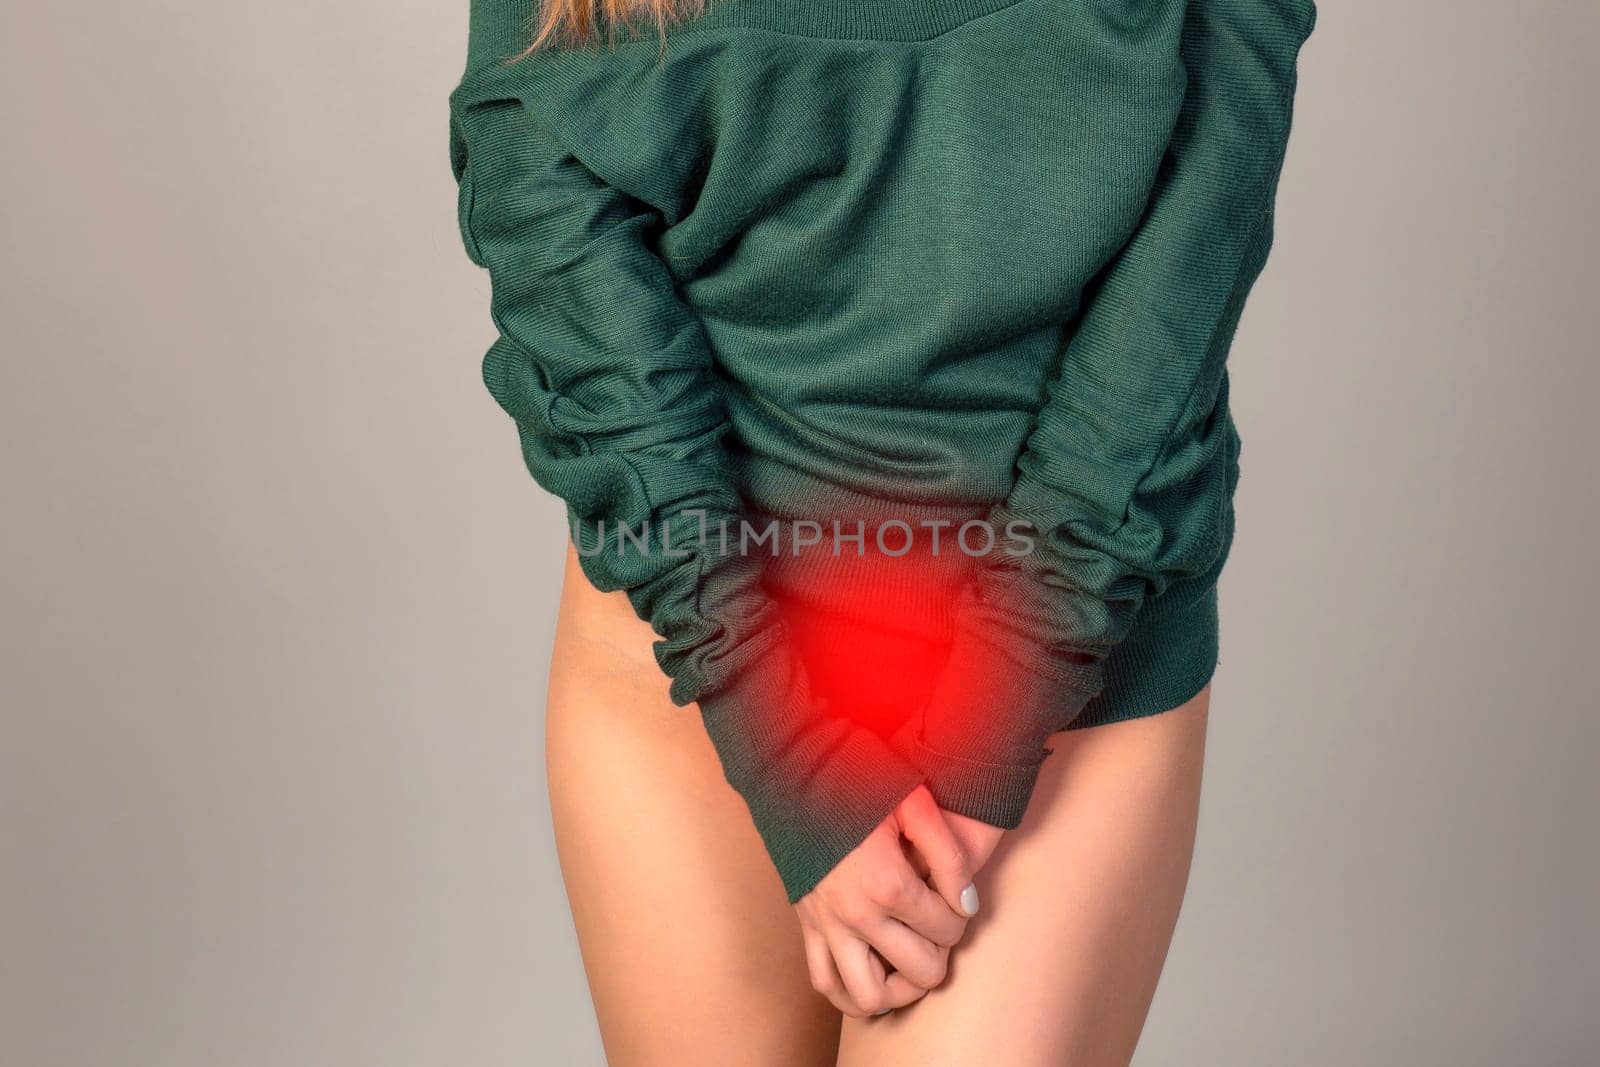 Menstrual pain, woman with stomachache suffering from pms , endometriosis, cystitis and other diseases of the urinary system, painful area highlighted in red by zartarn